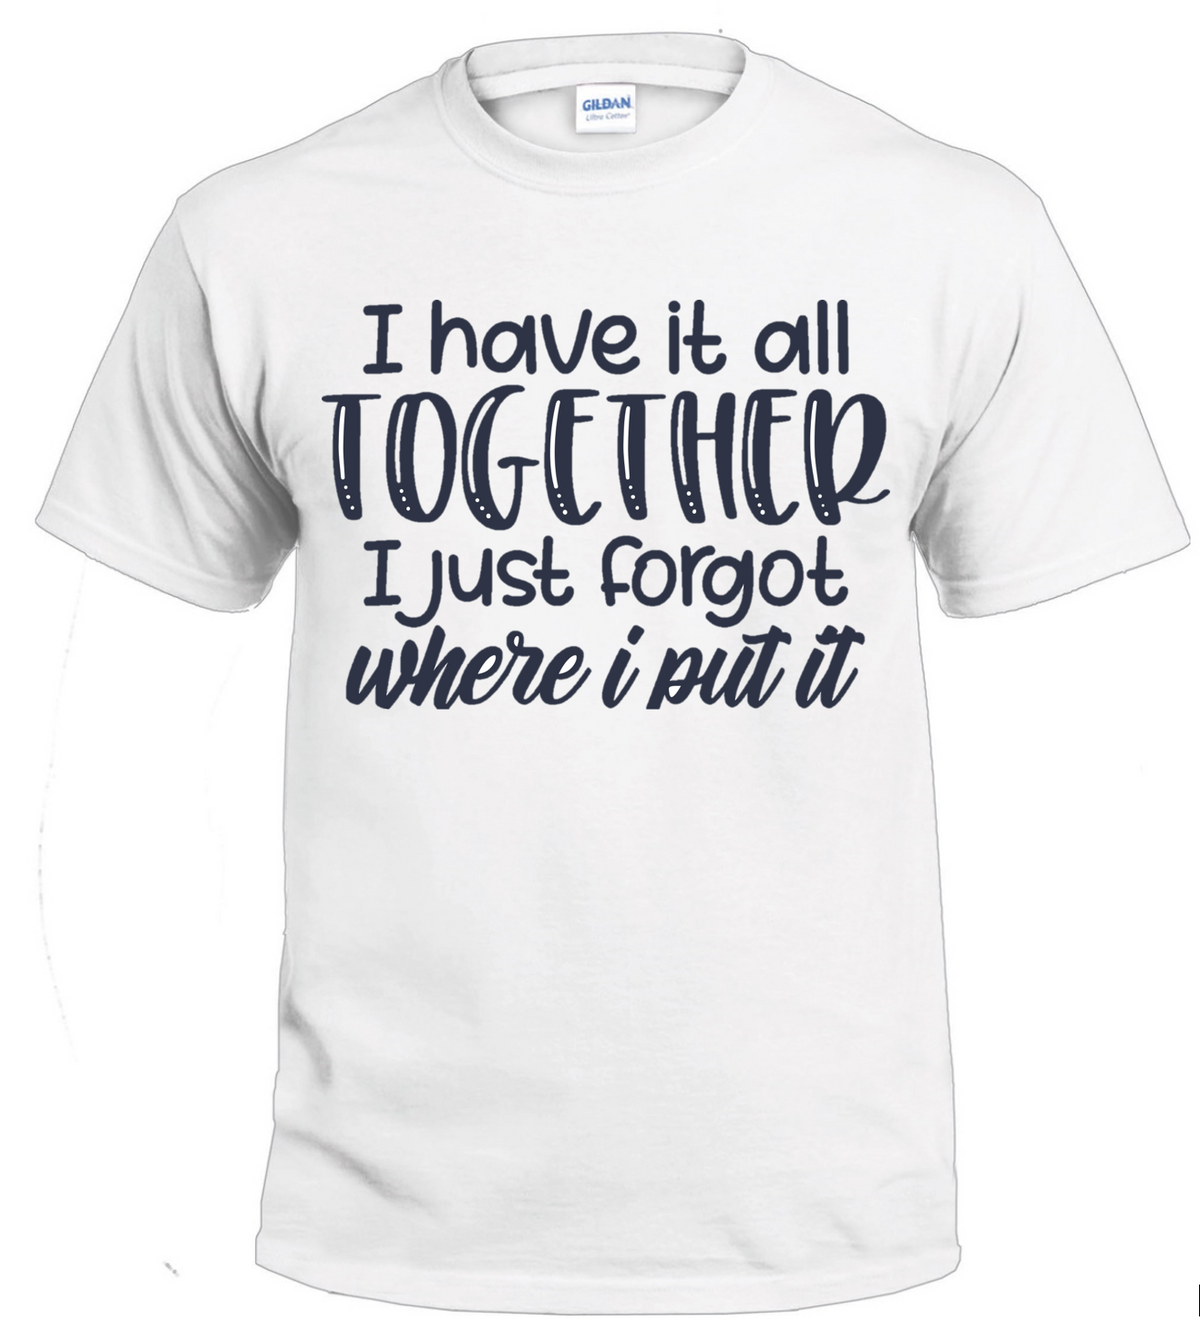 I Have It All Together Sassy t-shirt